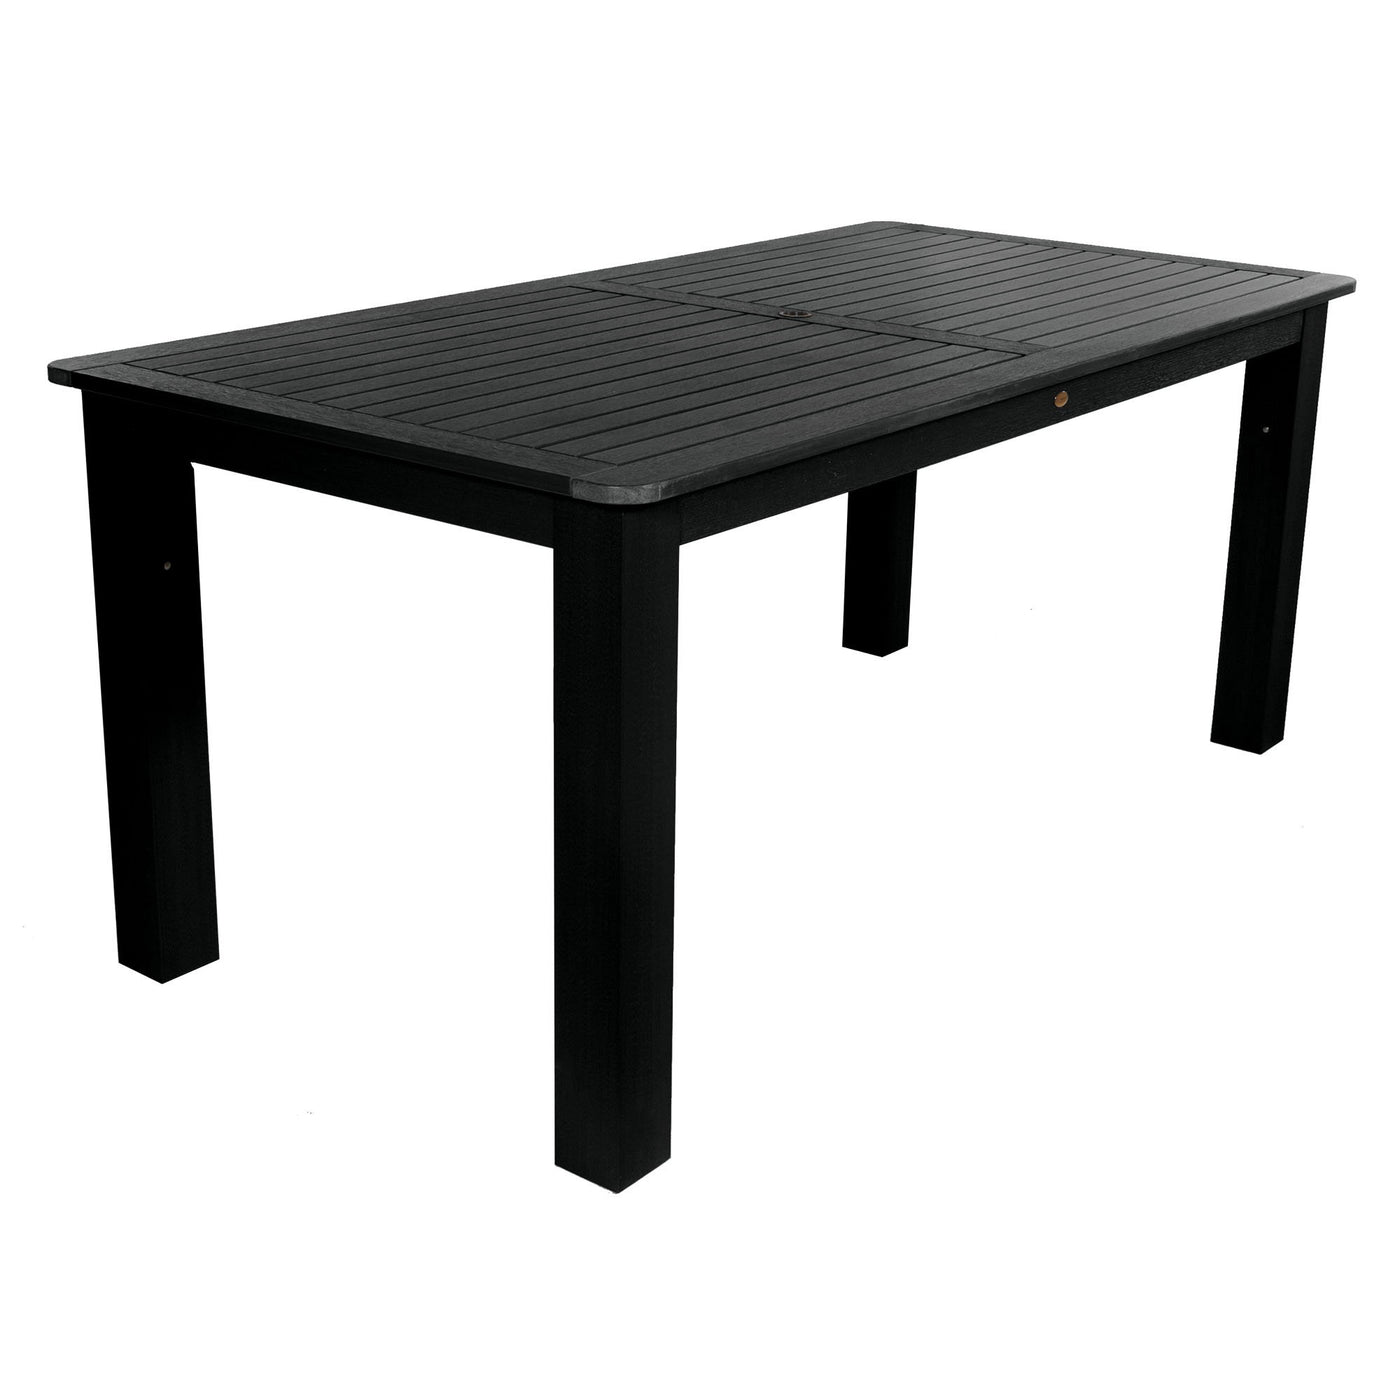 Rectangular 42in x 84in Oversized Dining Table - Counter Height Dining Highwood USA Black 